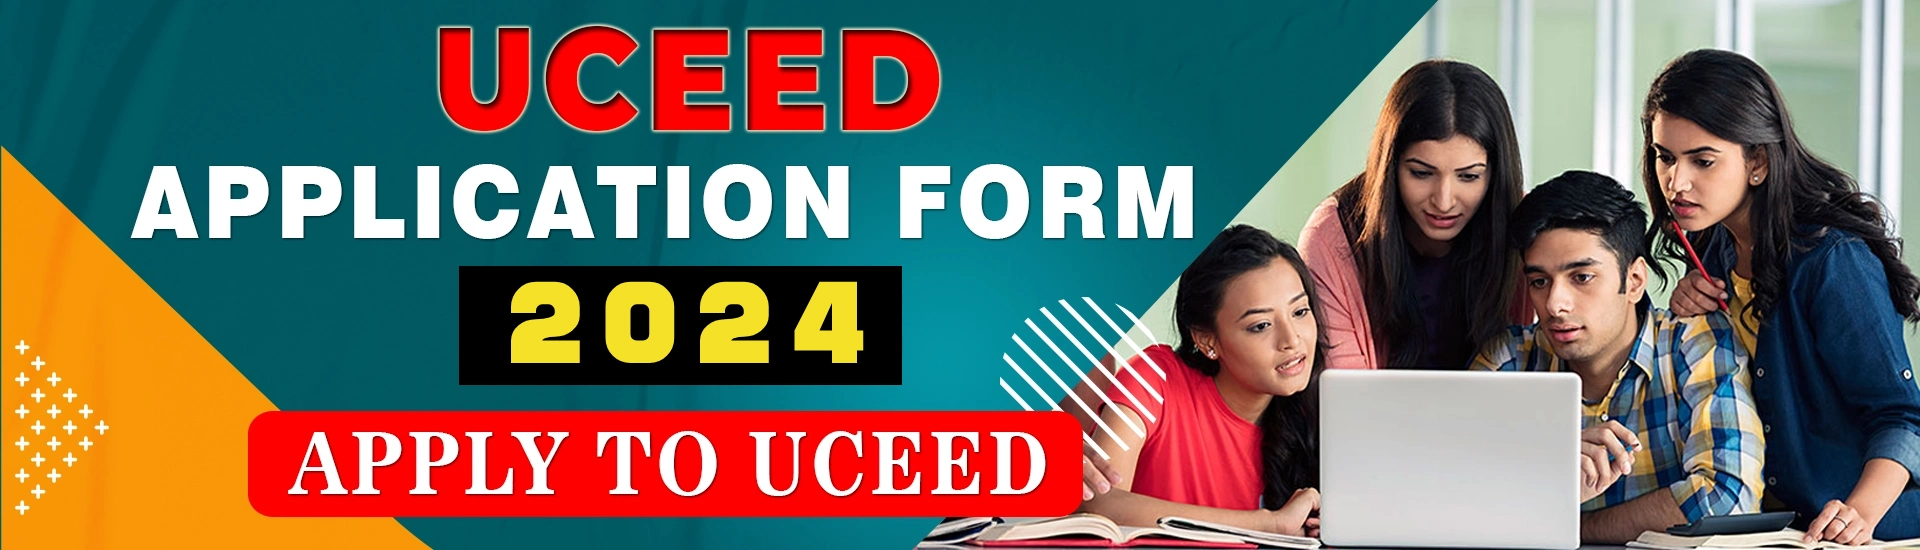 UCEED APPLICATION FORM 2024